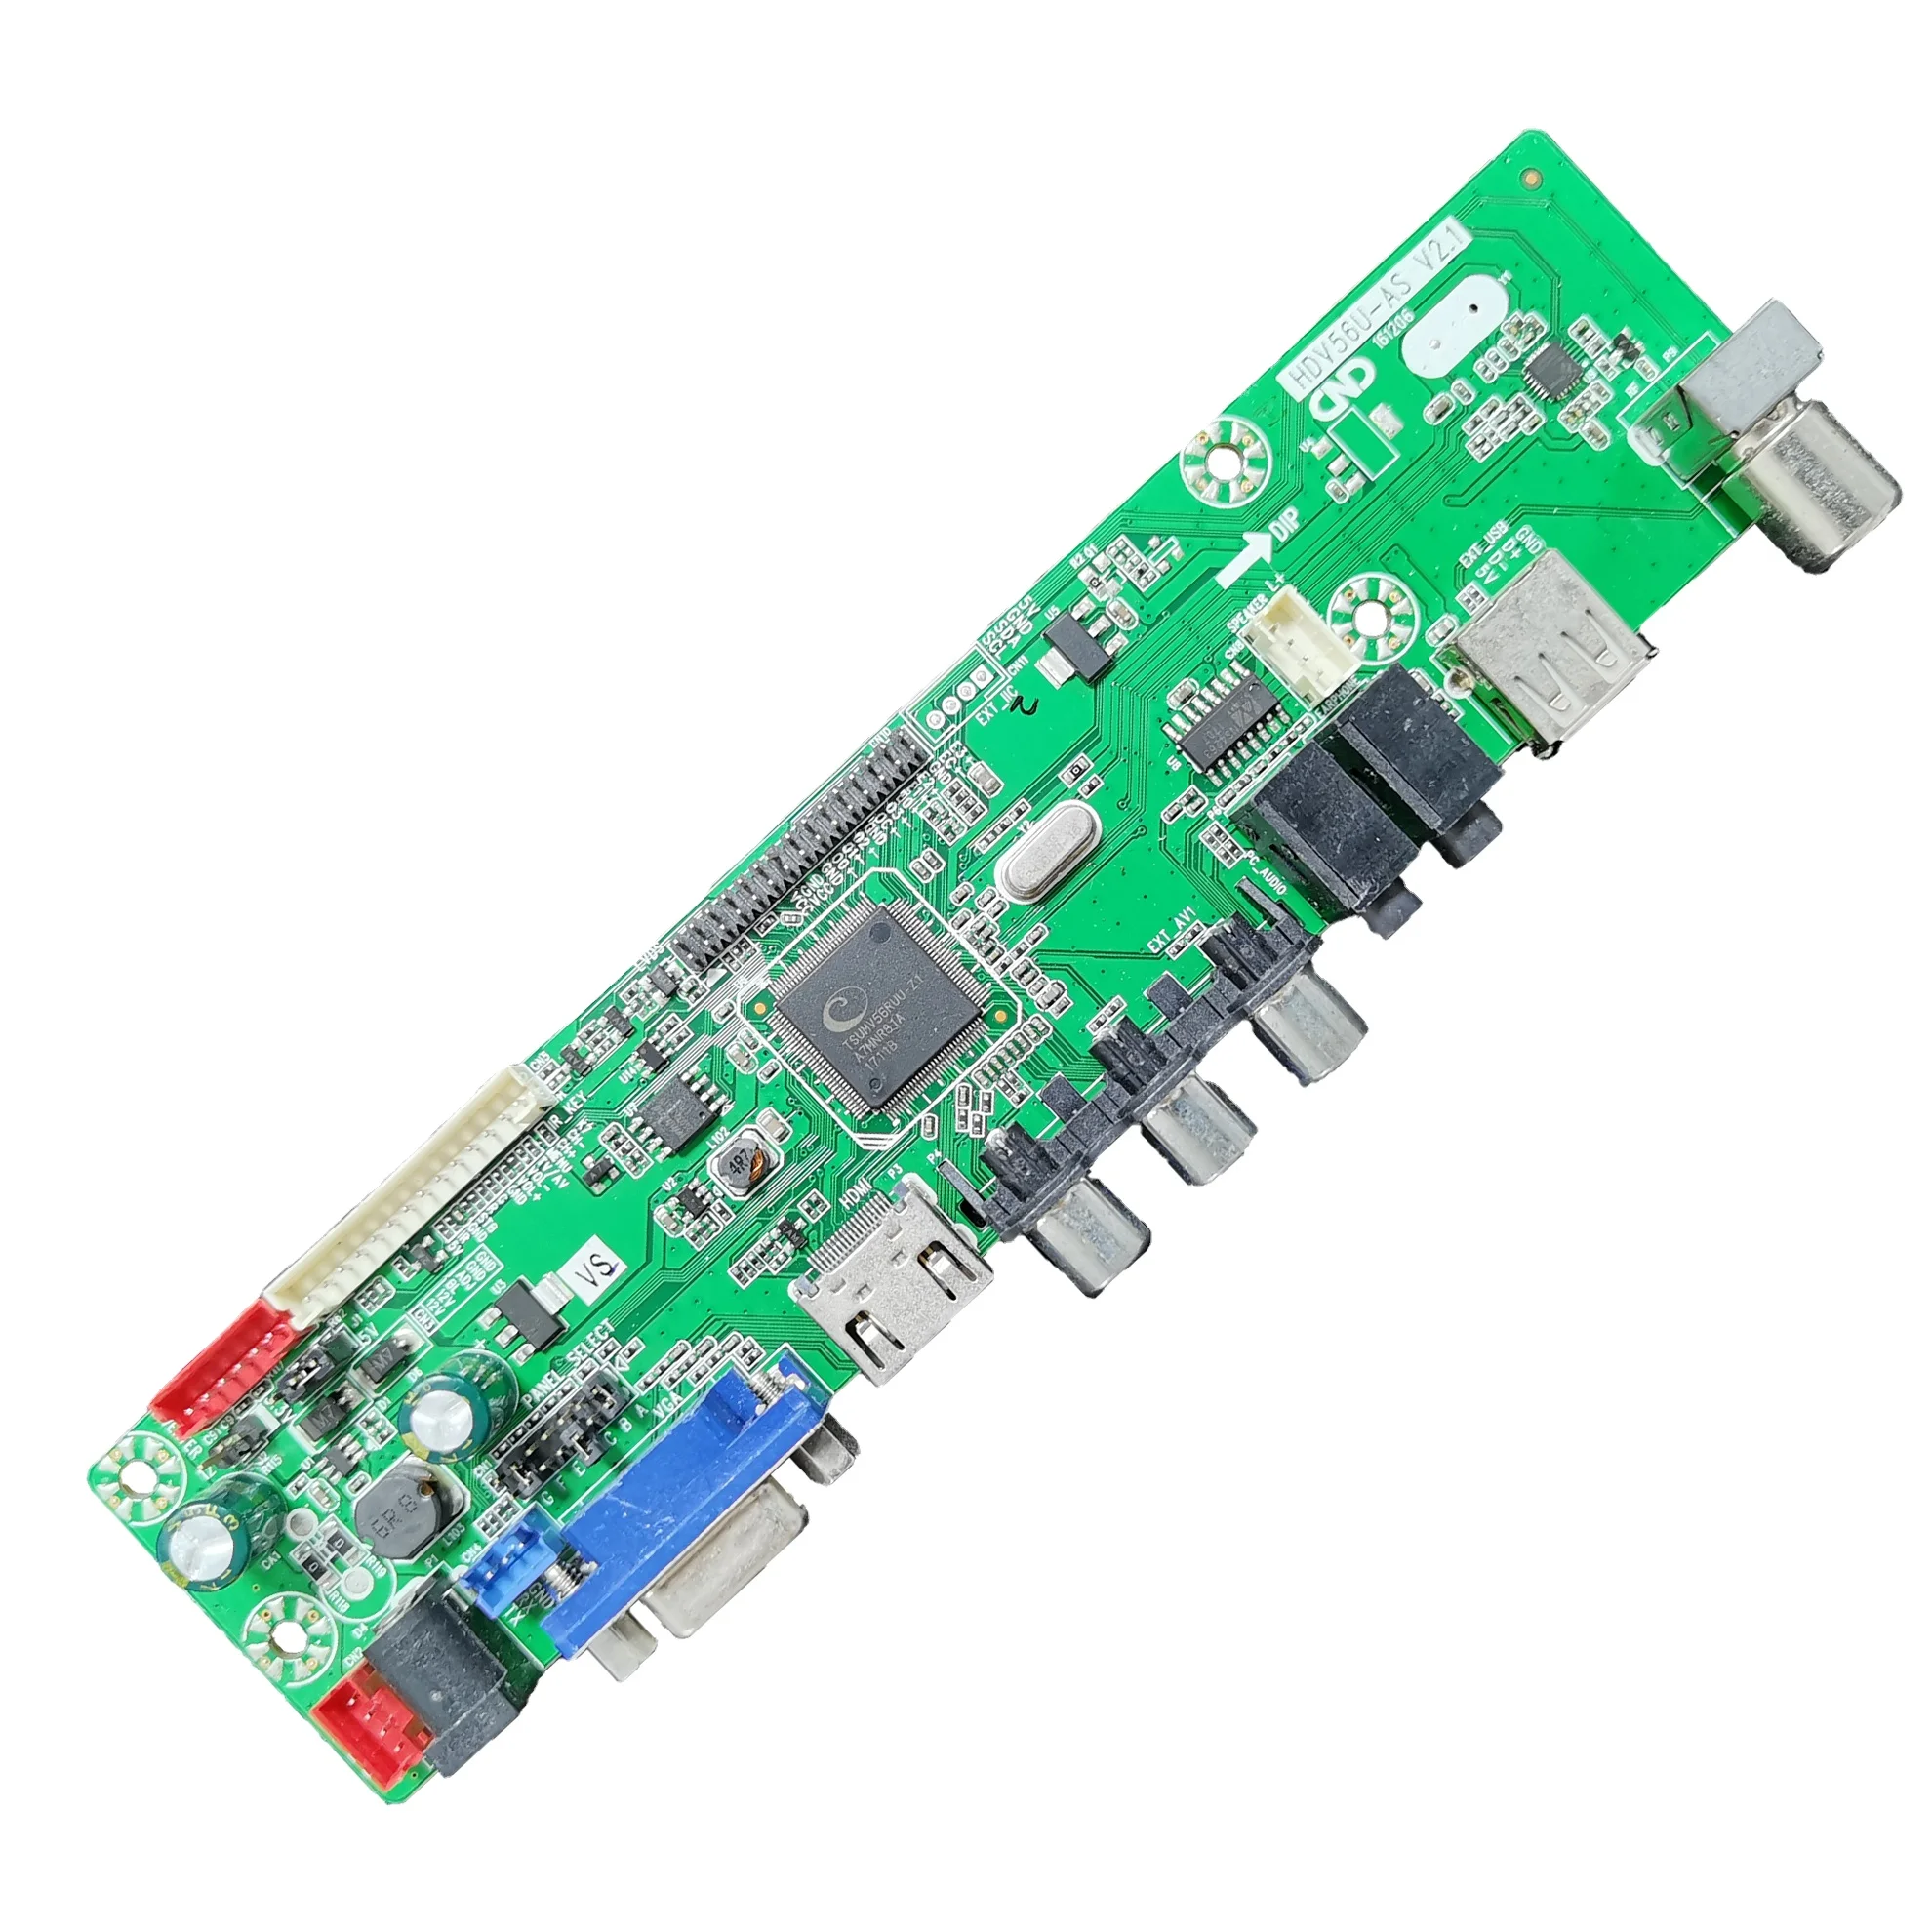 Graduation album Great Applied Programmed Ic Lcd Led Tv Motherboard / Cheap Price Universal V59 Circuit  Board/lcd Led Tv Kit Board - Buy Programmed Ic Lcd Led Tv Motherboard,Cheap  Price Universal V59 Circuit Board,Lcd Led Tv